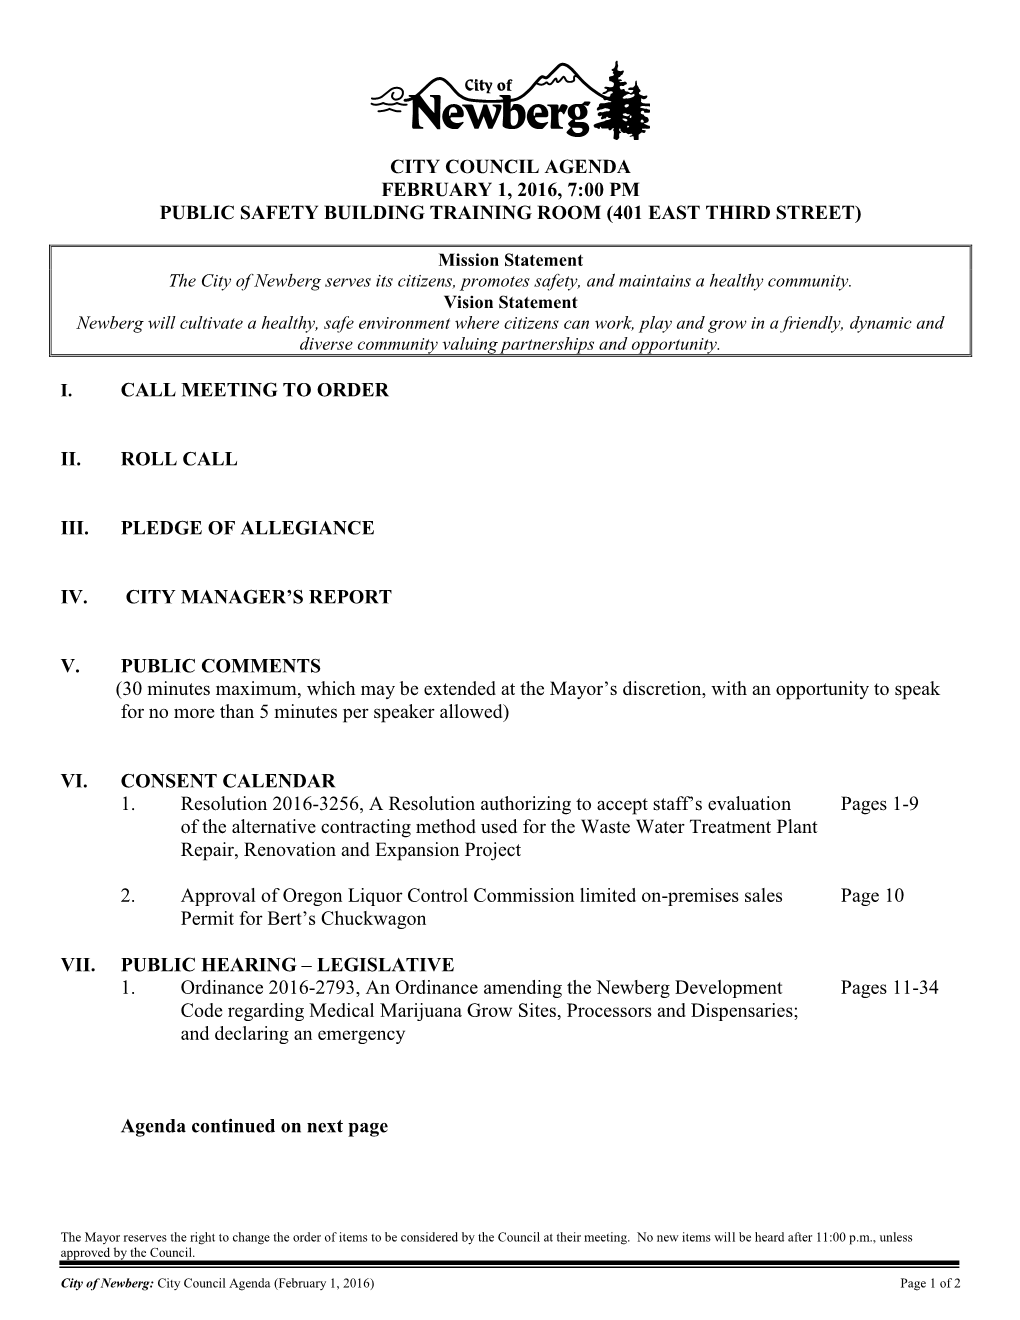 City Council Agenda February 1, 2016, 7:00 Pm Public Safety Building Training Room (401 East Third Street)